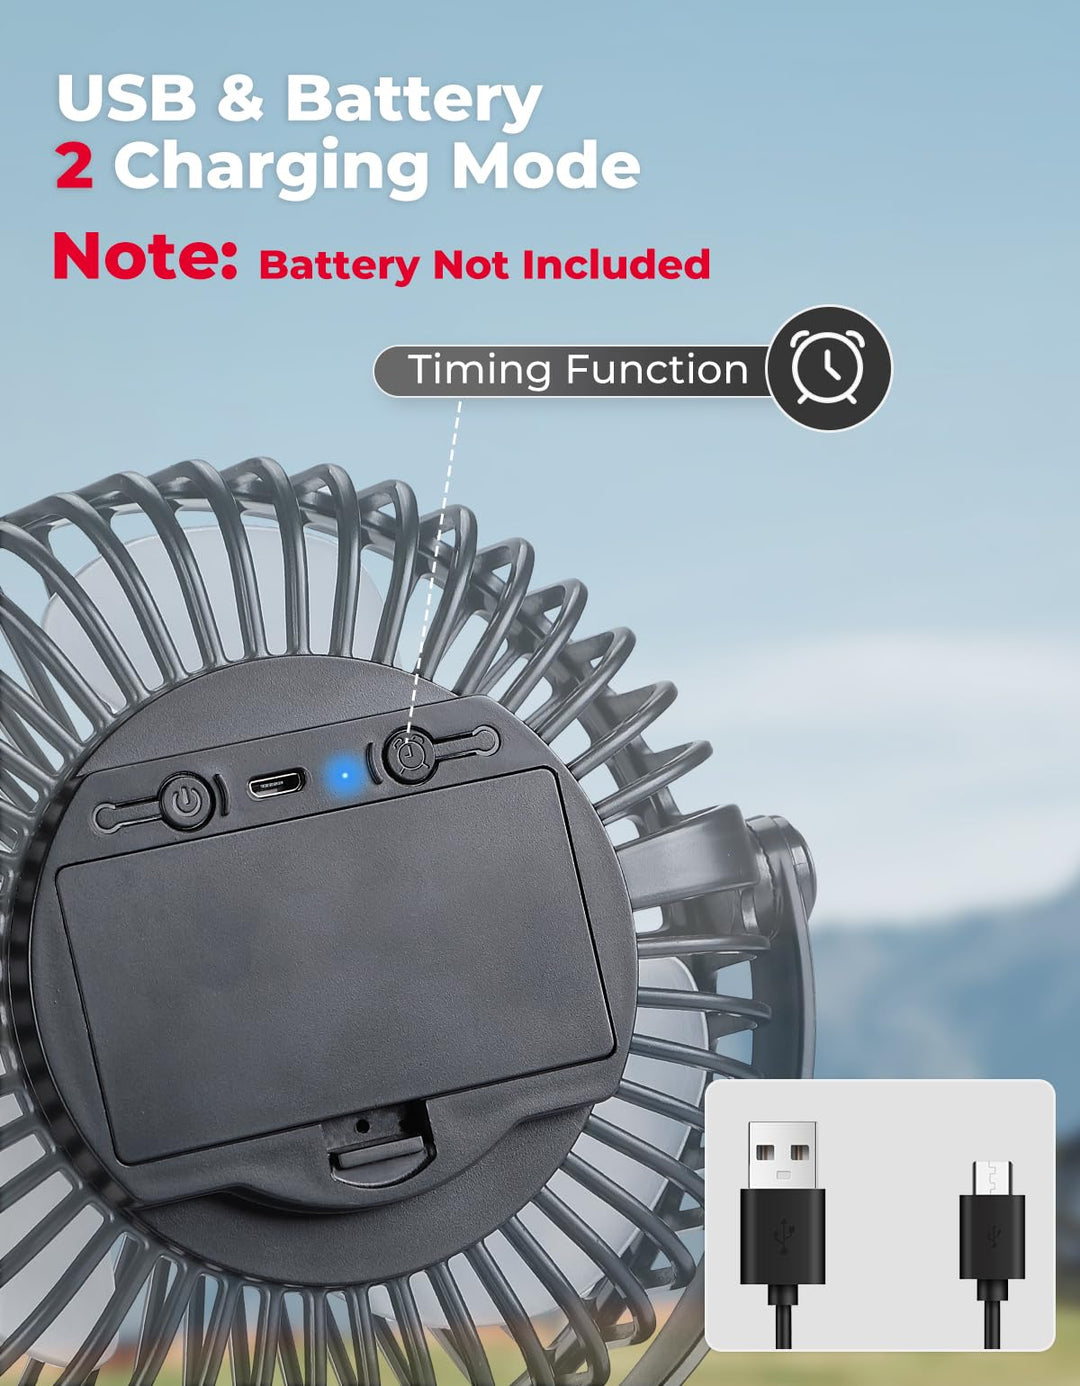 Long Battery Life 5 Speeds Fan with Clip for EZGO Club Car Drive - Kemimoto